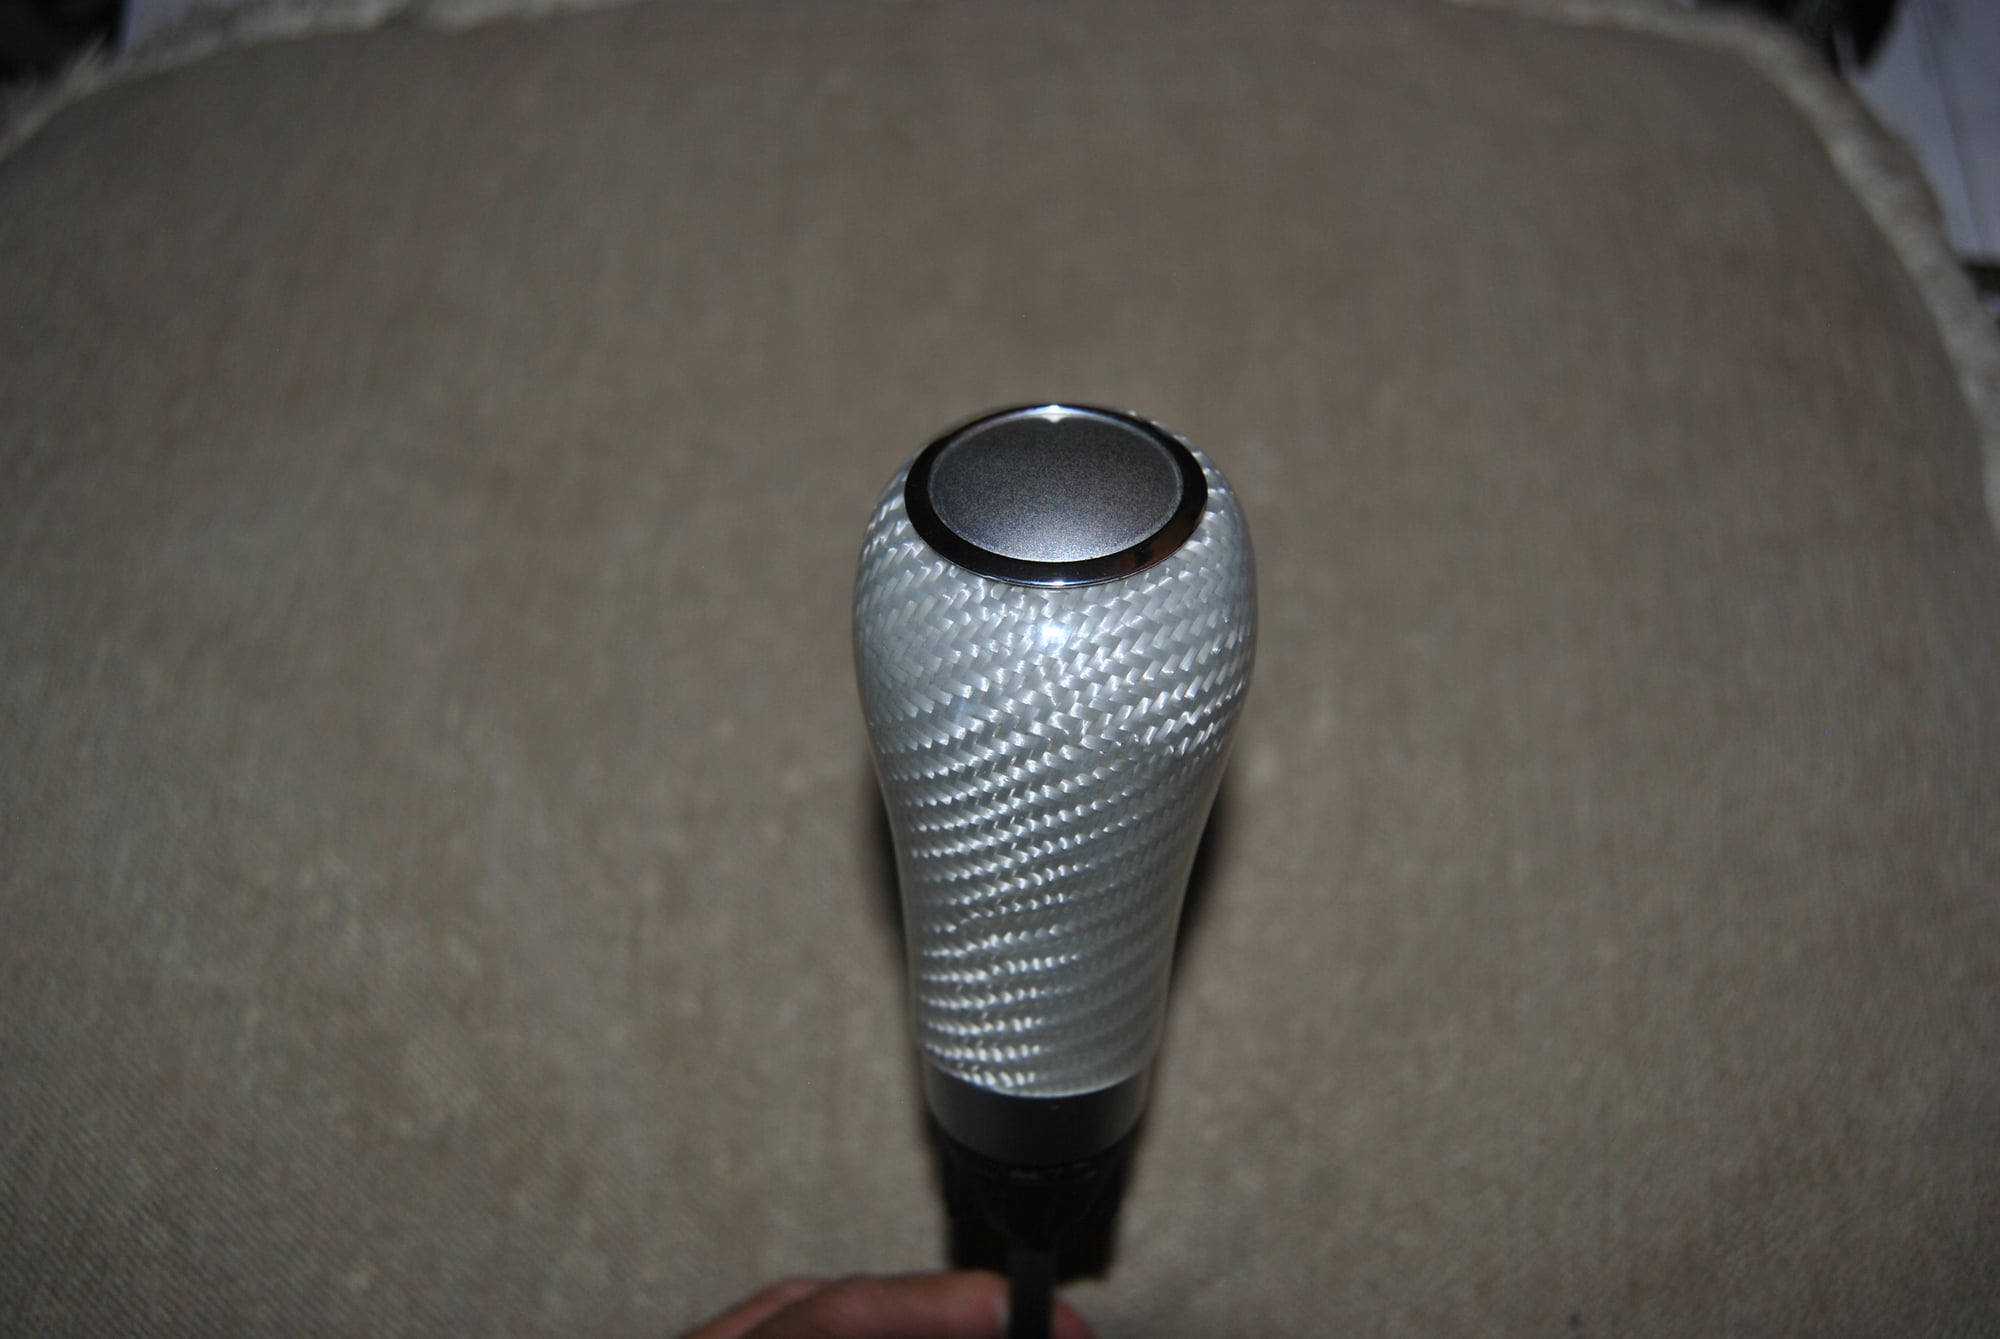 Interior/Upholstery - '01-'04 MB W203 Flat Bottom Carbon Fiber & Leather Steering Wheel/Gearshift Knob - Used - 2001 to 2004 Mercedes-Benz All Models - Upland, CA 91784, United States